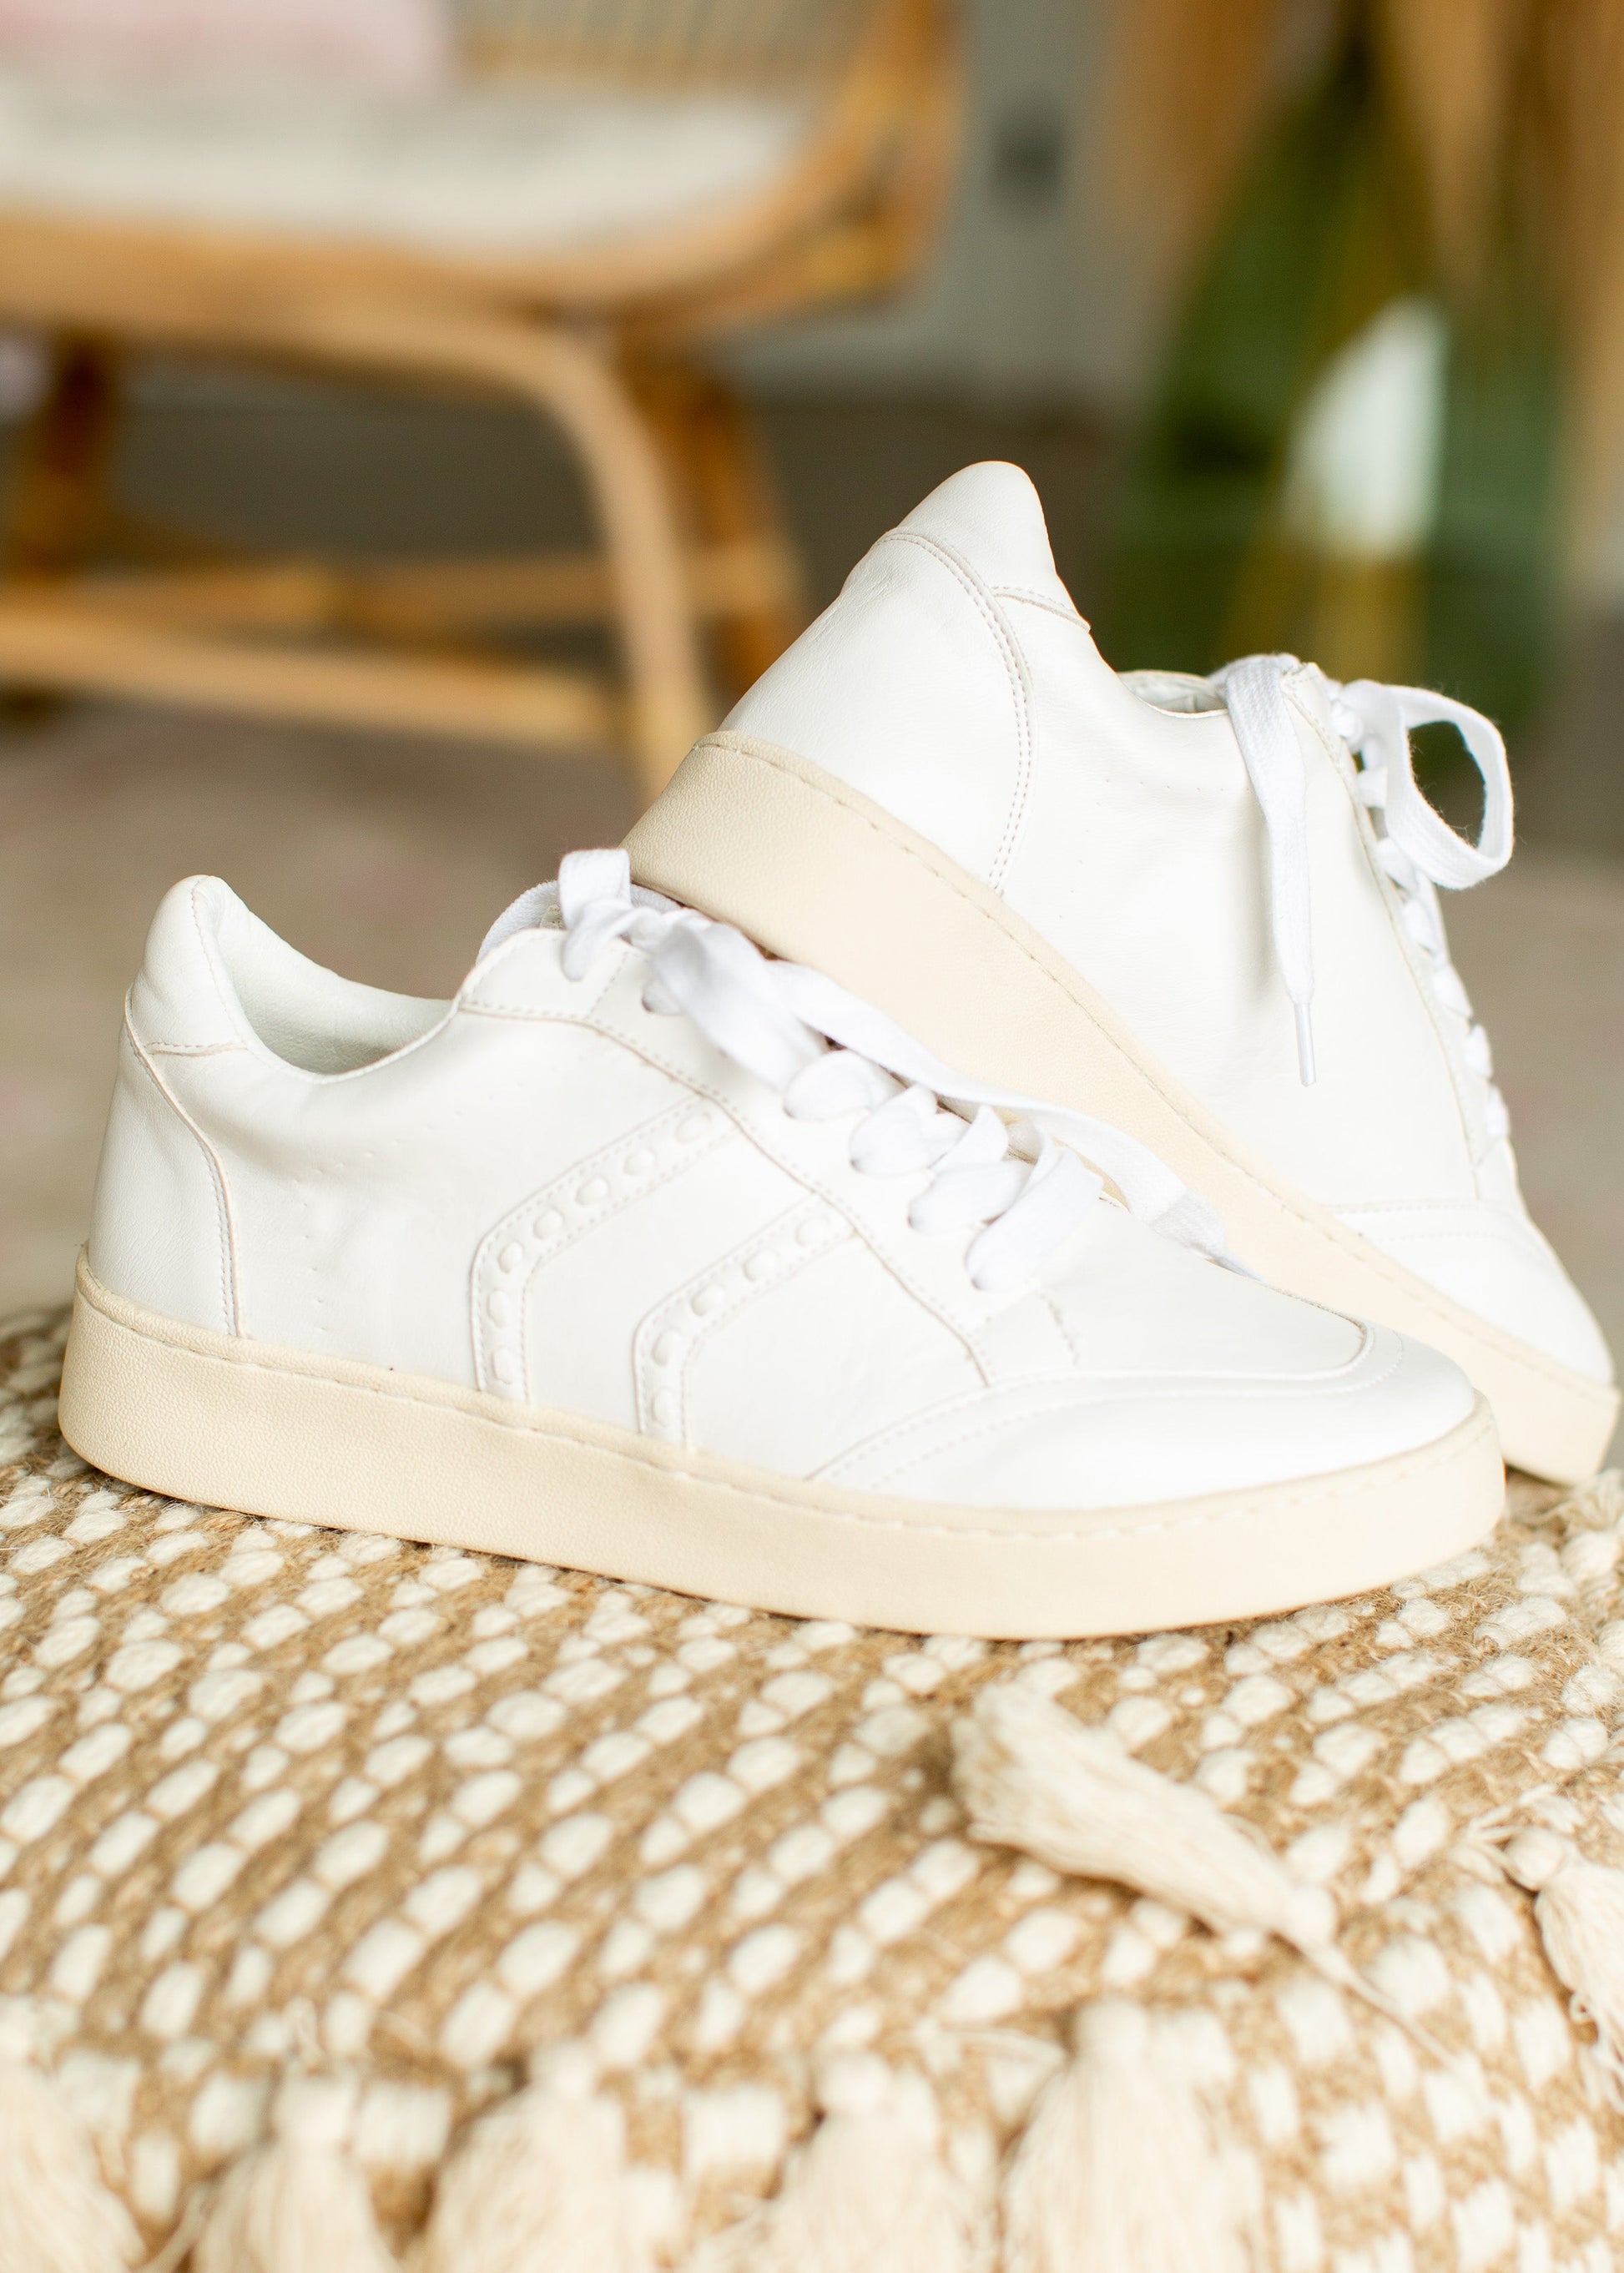 White Stitch Lace Up Sneaker - FINAL SALE Shoes